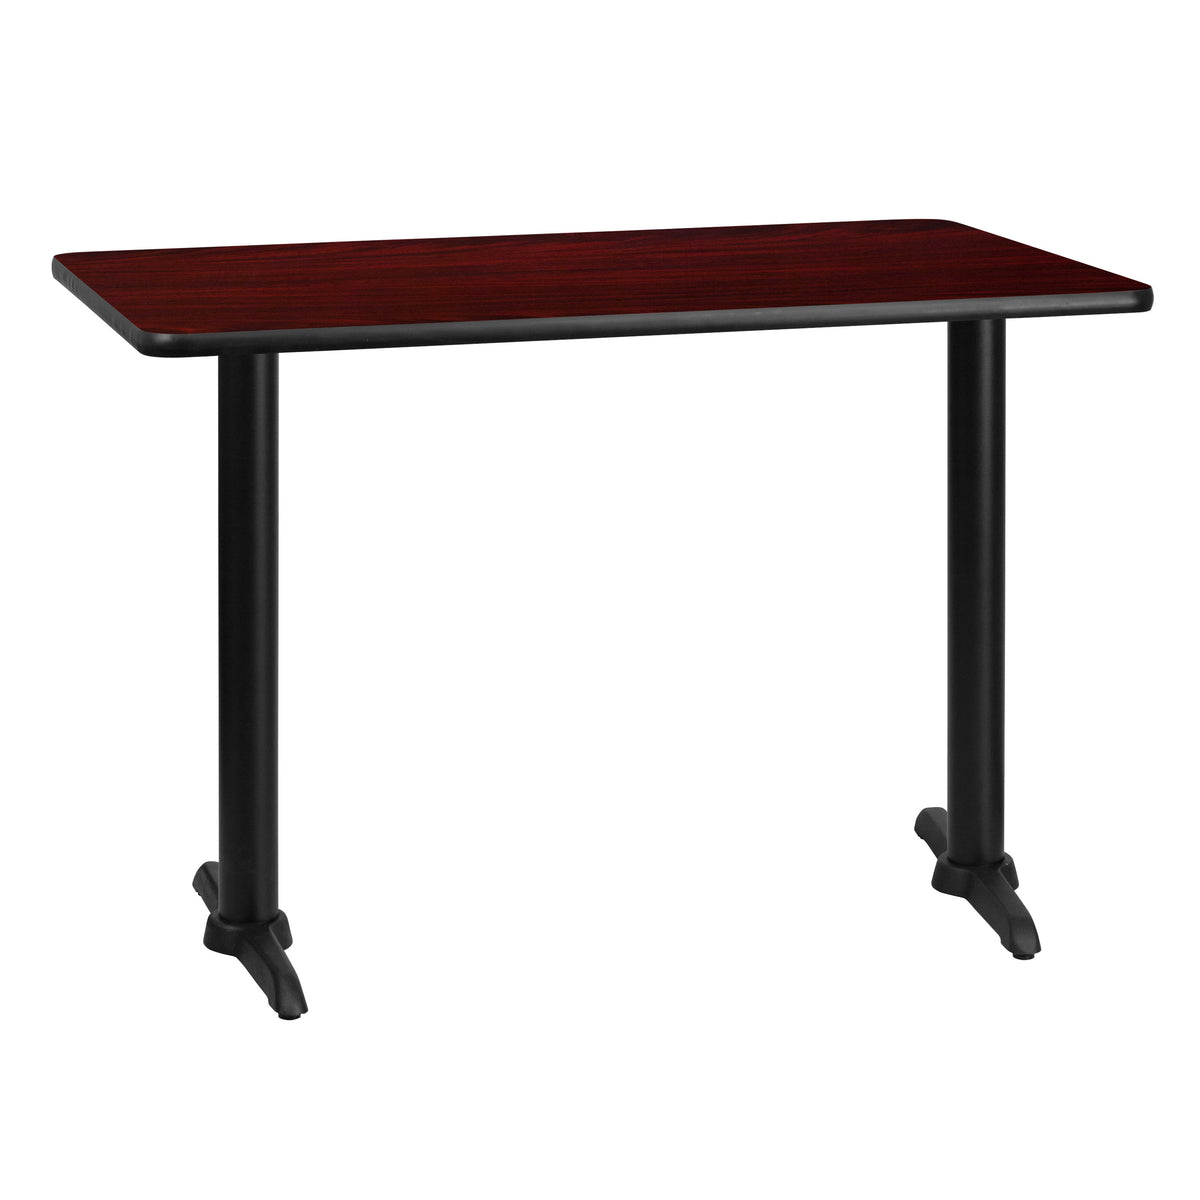 Mahogany |#| 30inch x 42inch Mahogany Laminate Table Top with 5inch x 22inch Table Height Bases